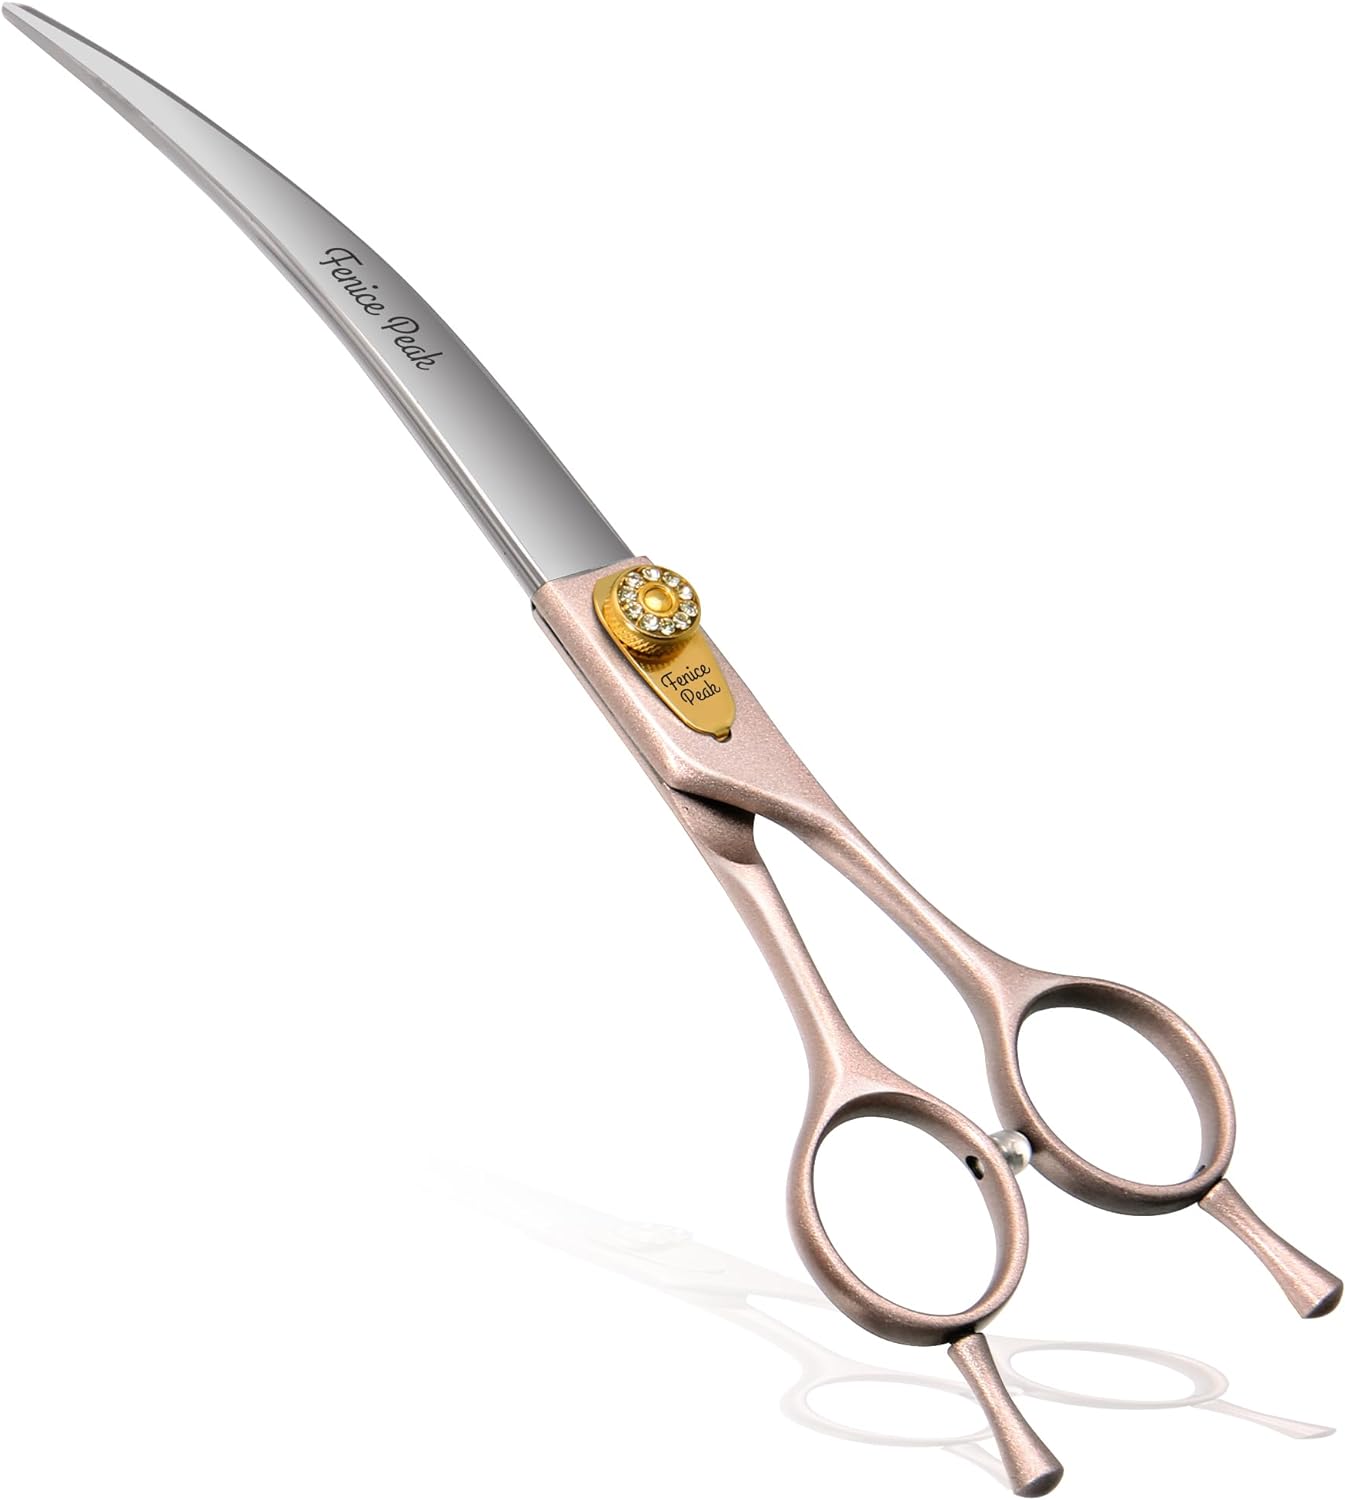 Fenice Peak Professional Curved Dog Grooming Scissors 7'' Rose Gold 440C Stainless Steel Pet Cutting Shears Safety Trimming Shearing for Dogs Cats